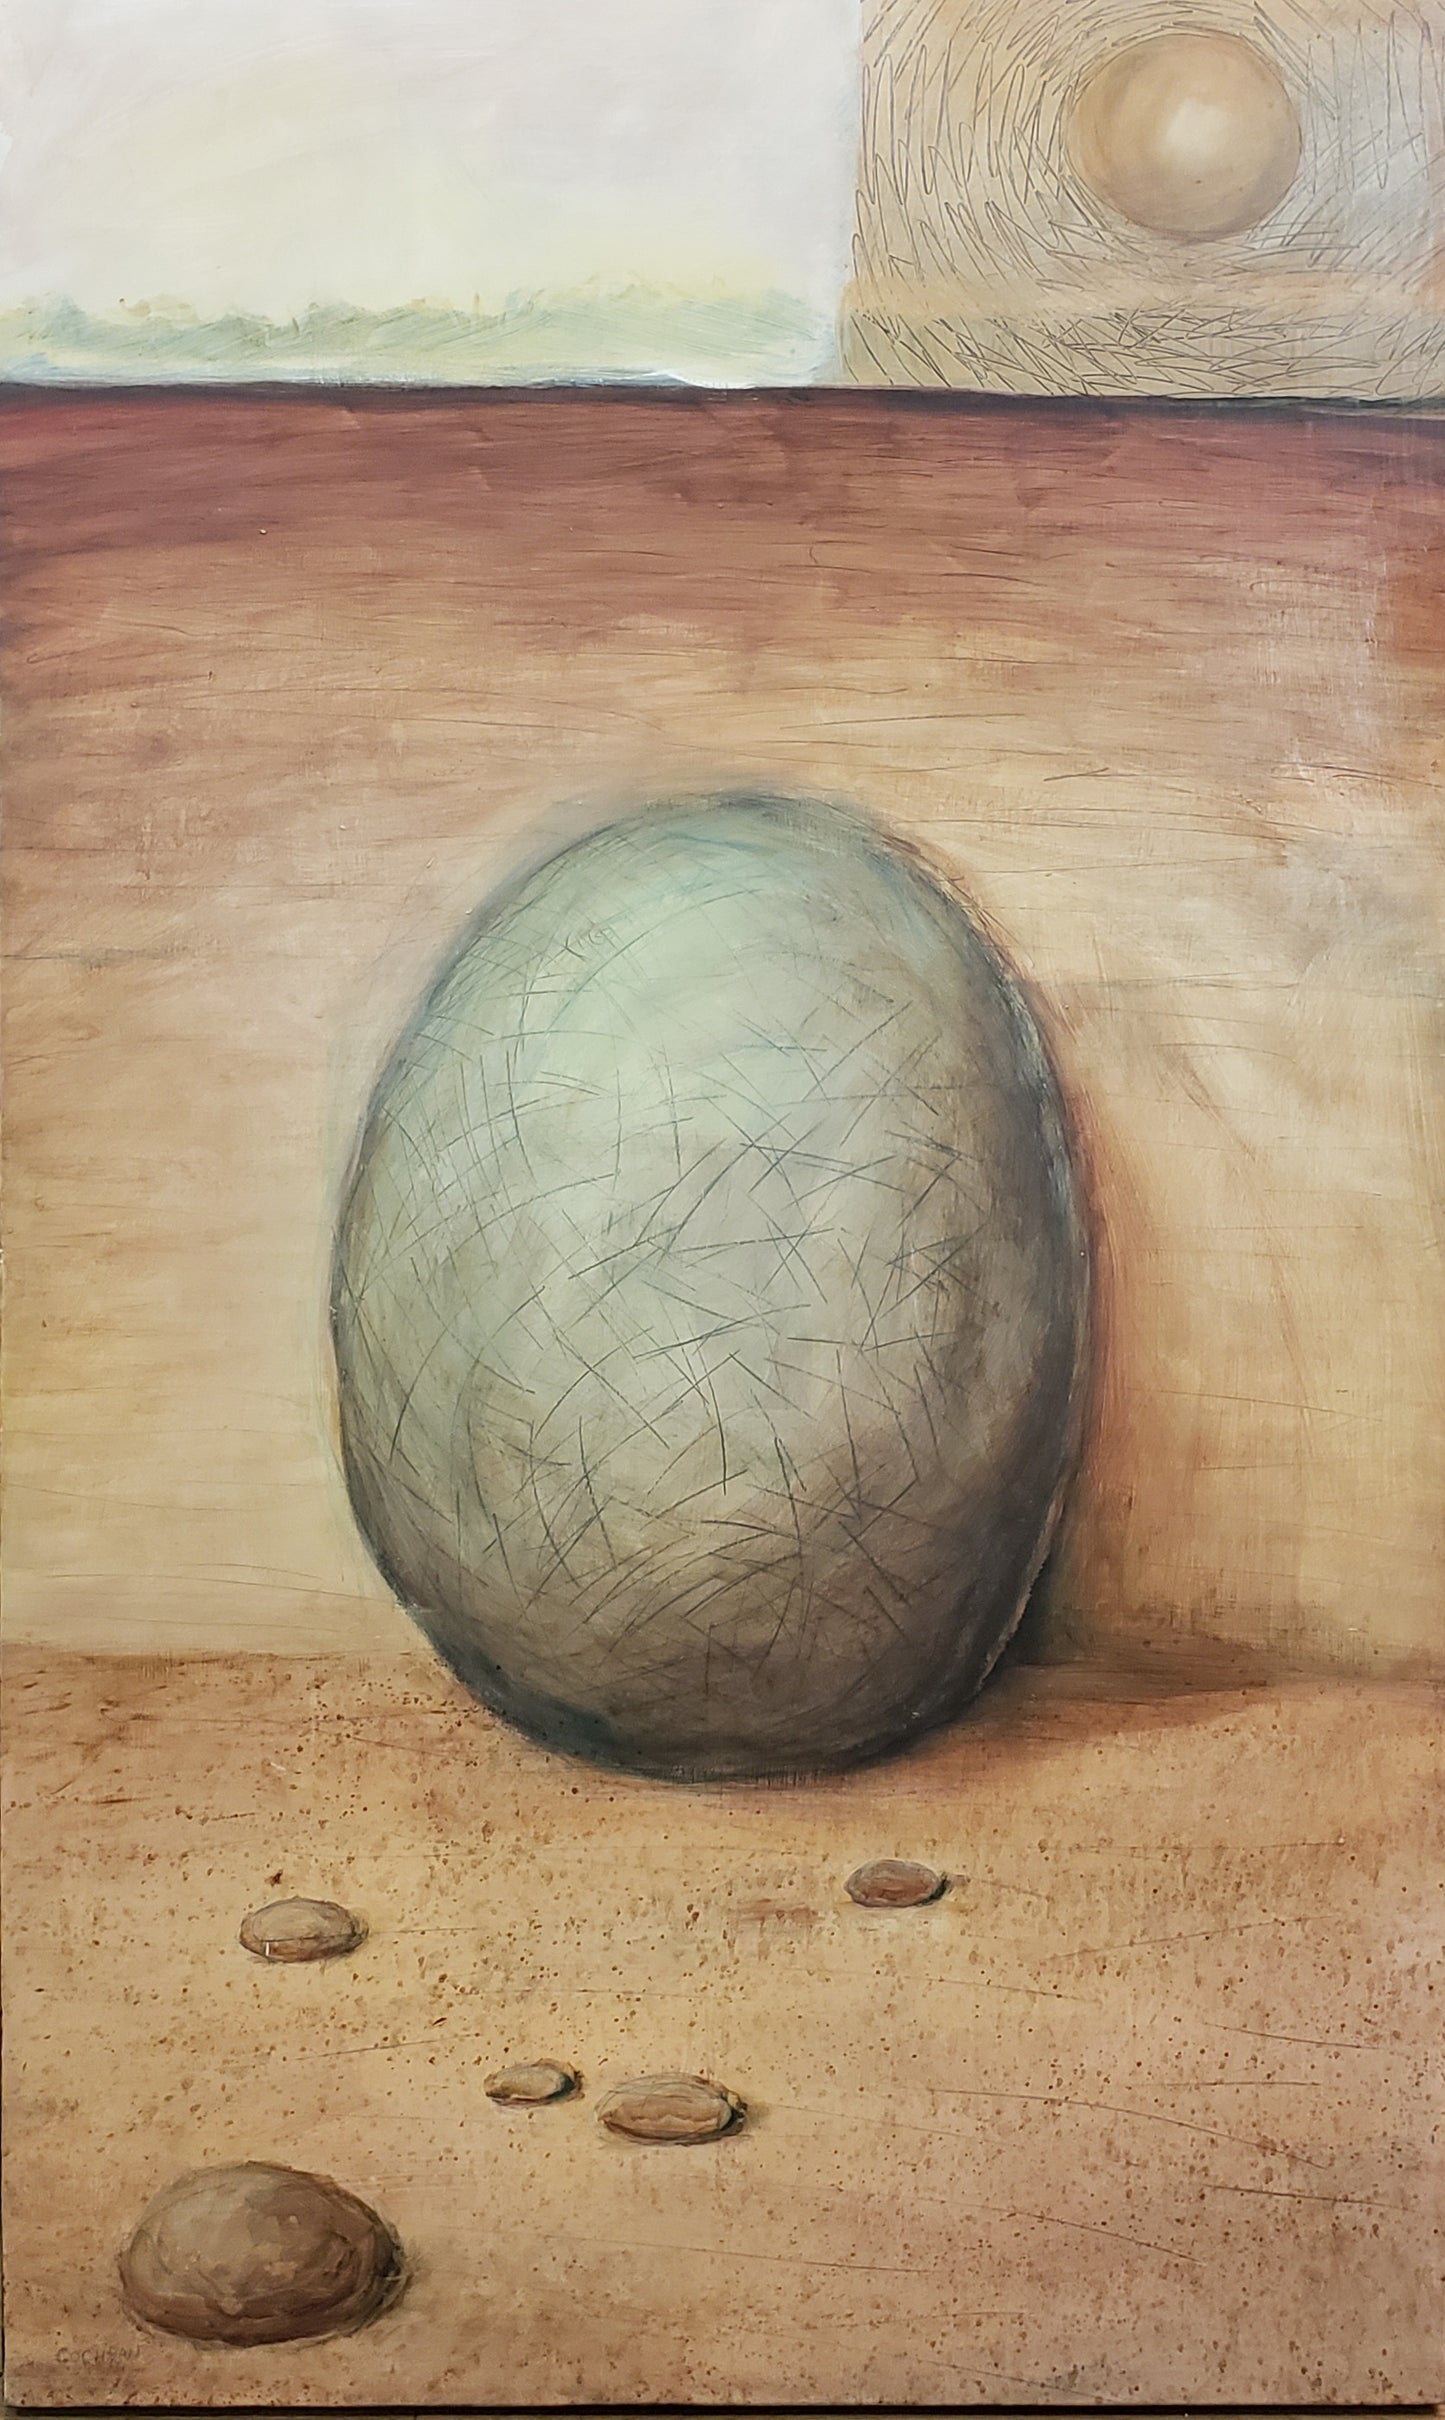 Painting on Wood, "Landscape with Ball" by Jeff Cochran